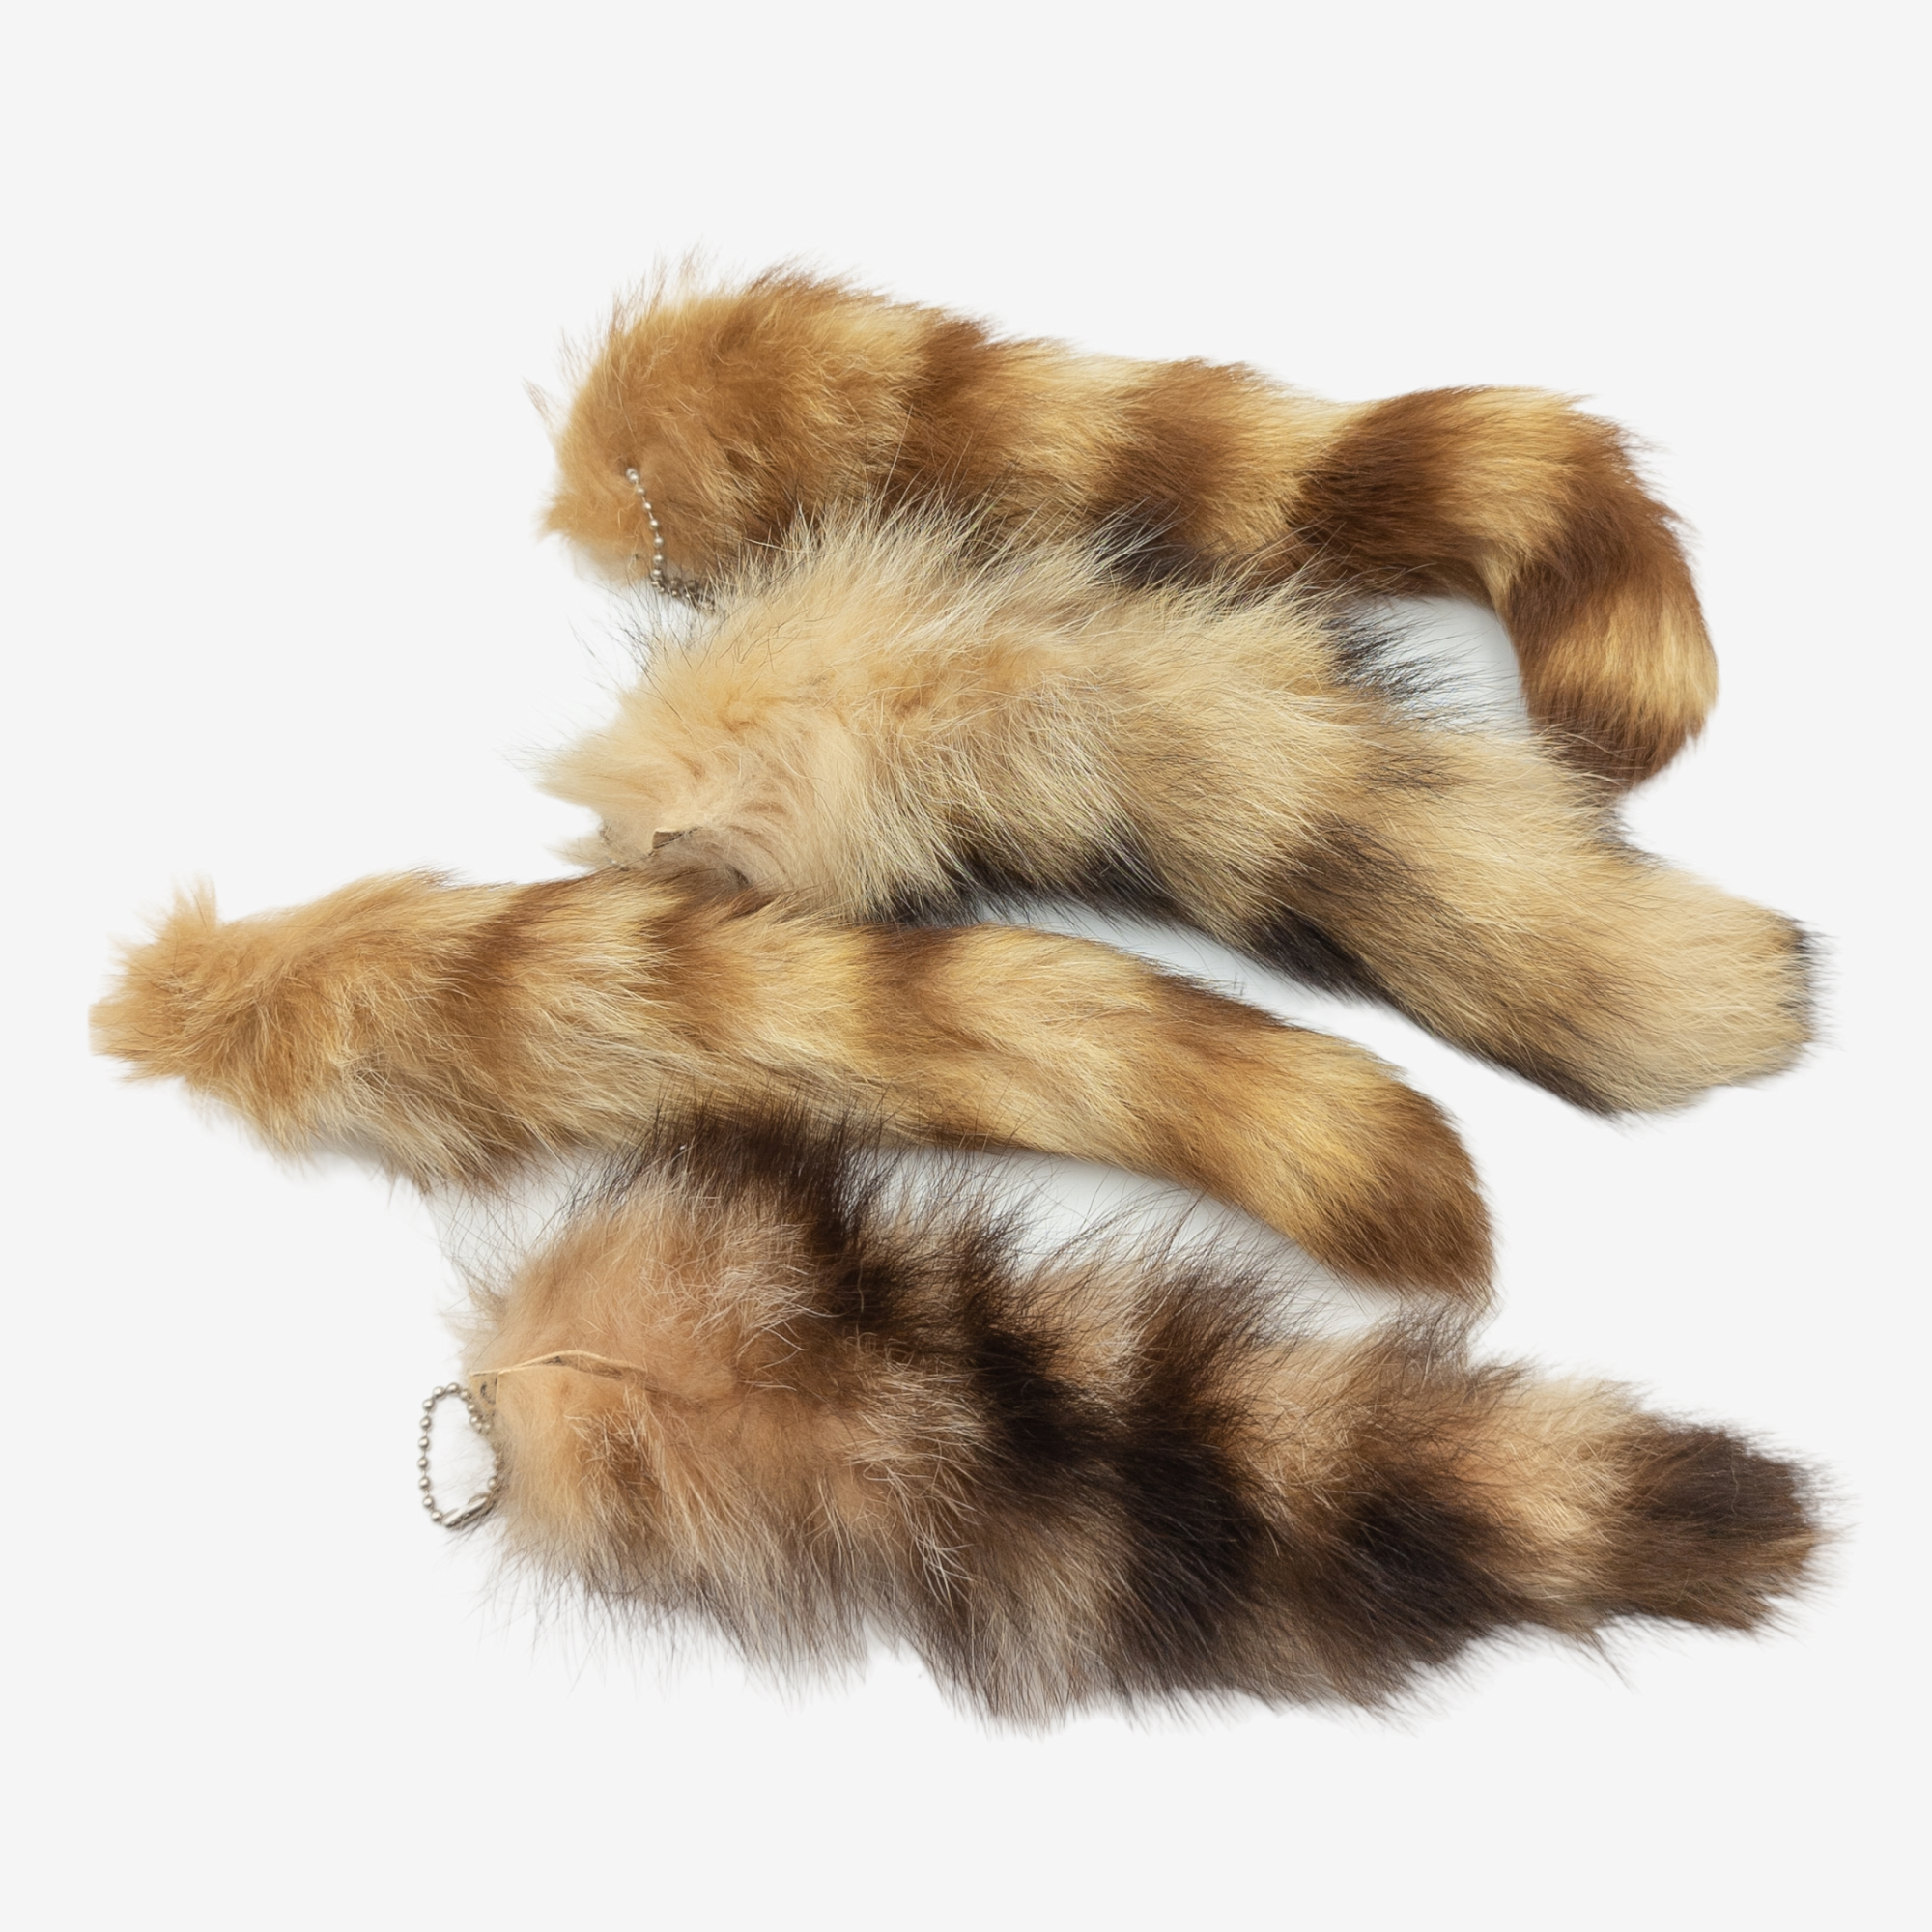 Tanned Raccoon Tail Keychains